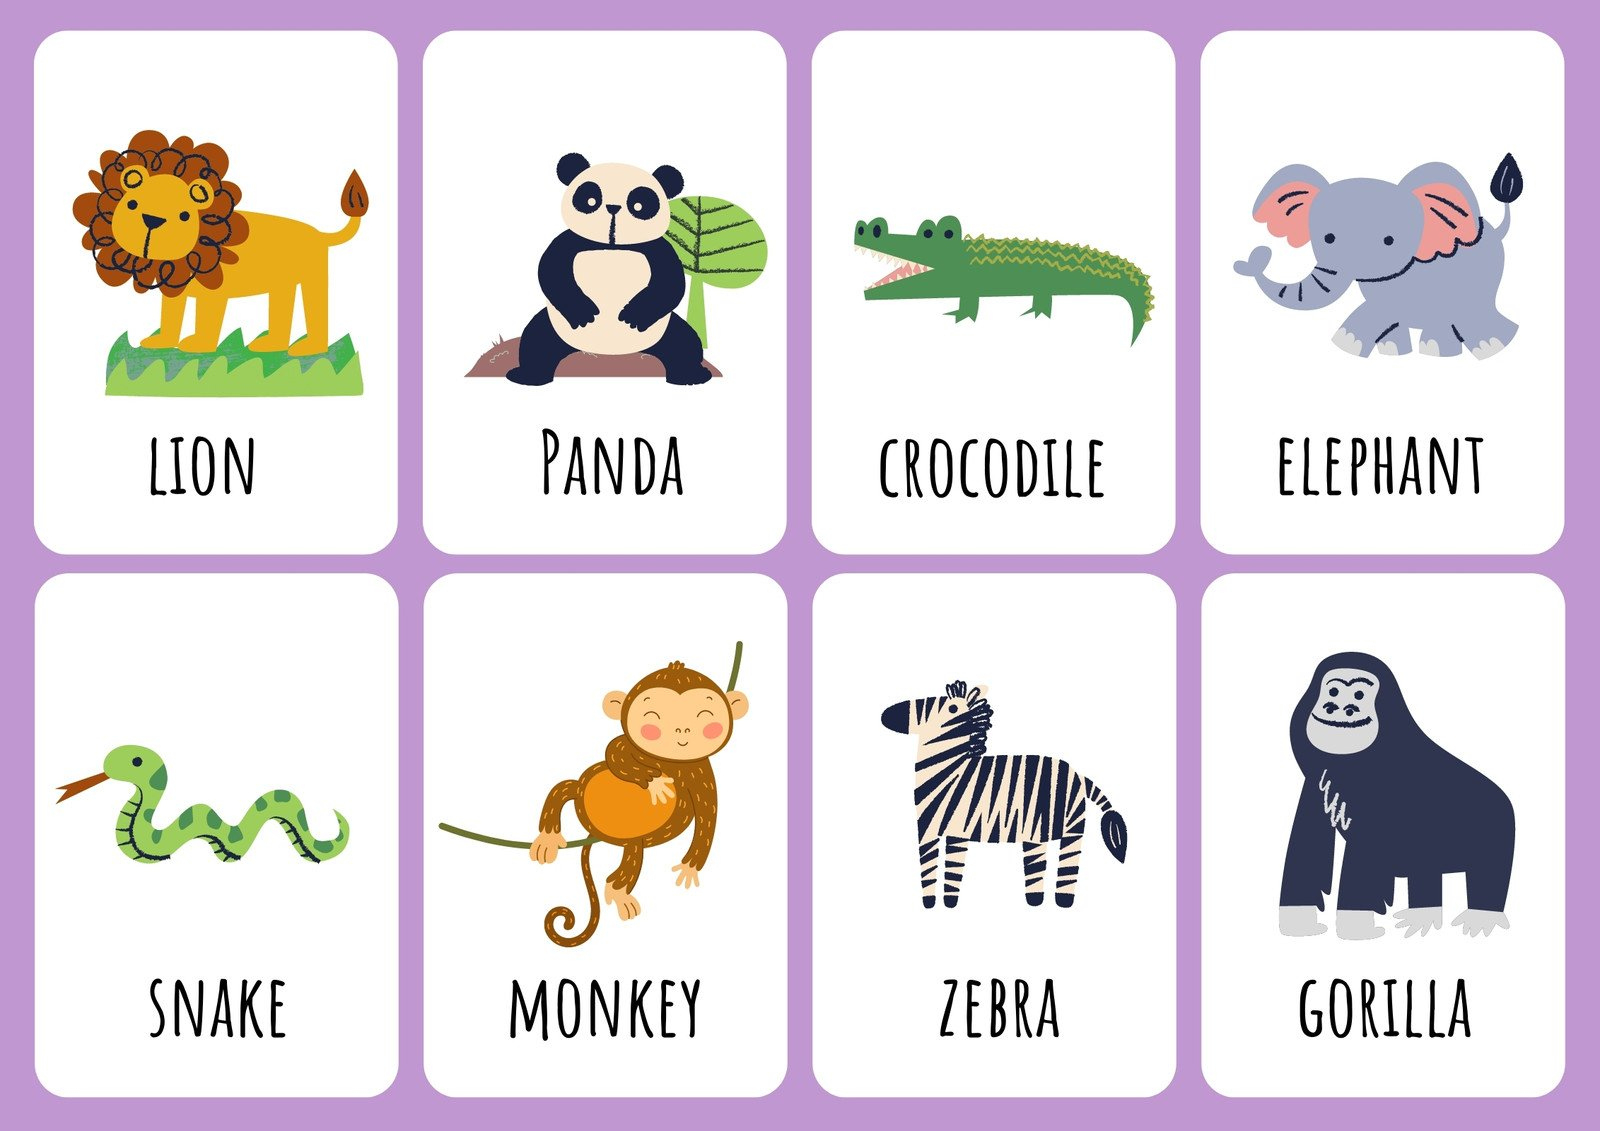 Free Animal Flashcards To Customize And Print | Canva for Free Printable Animal Cards